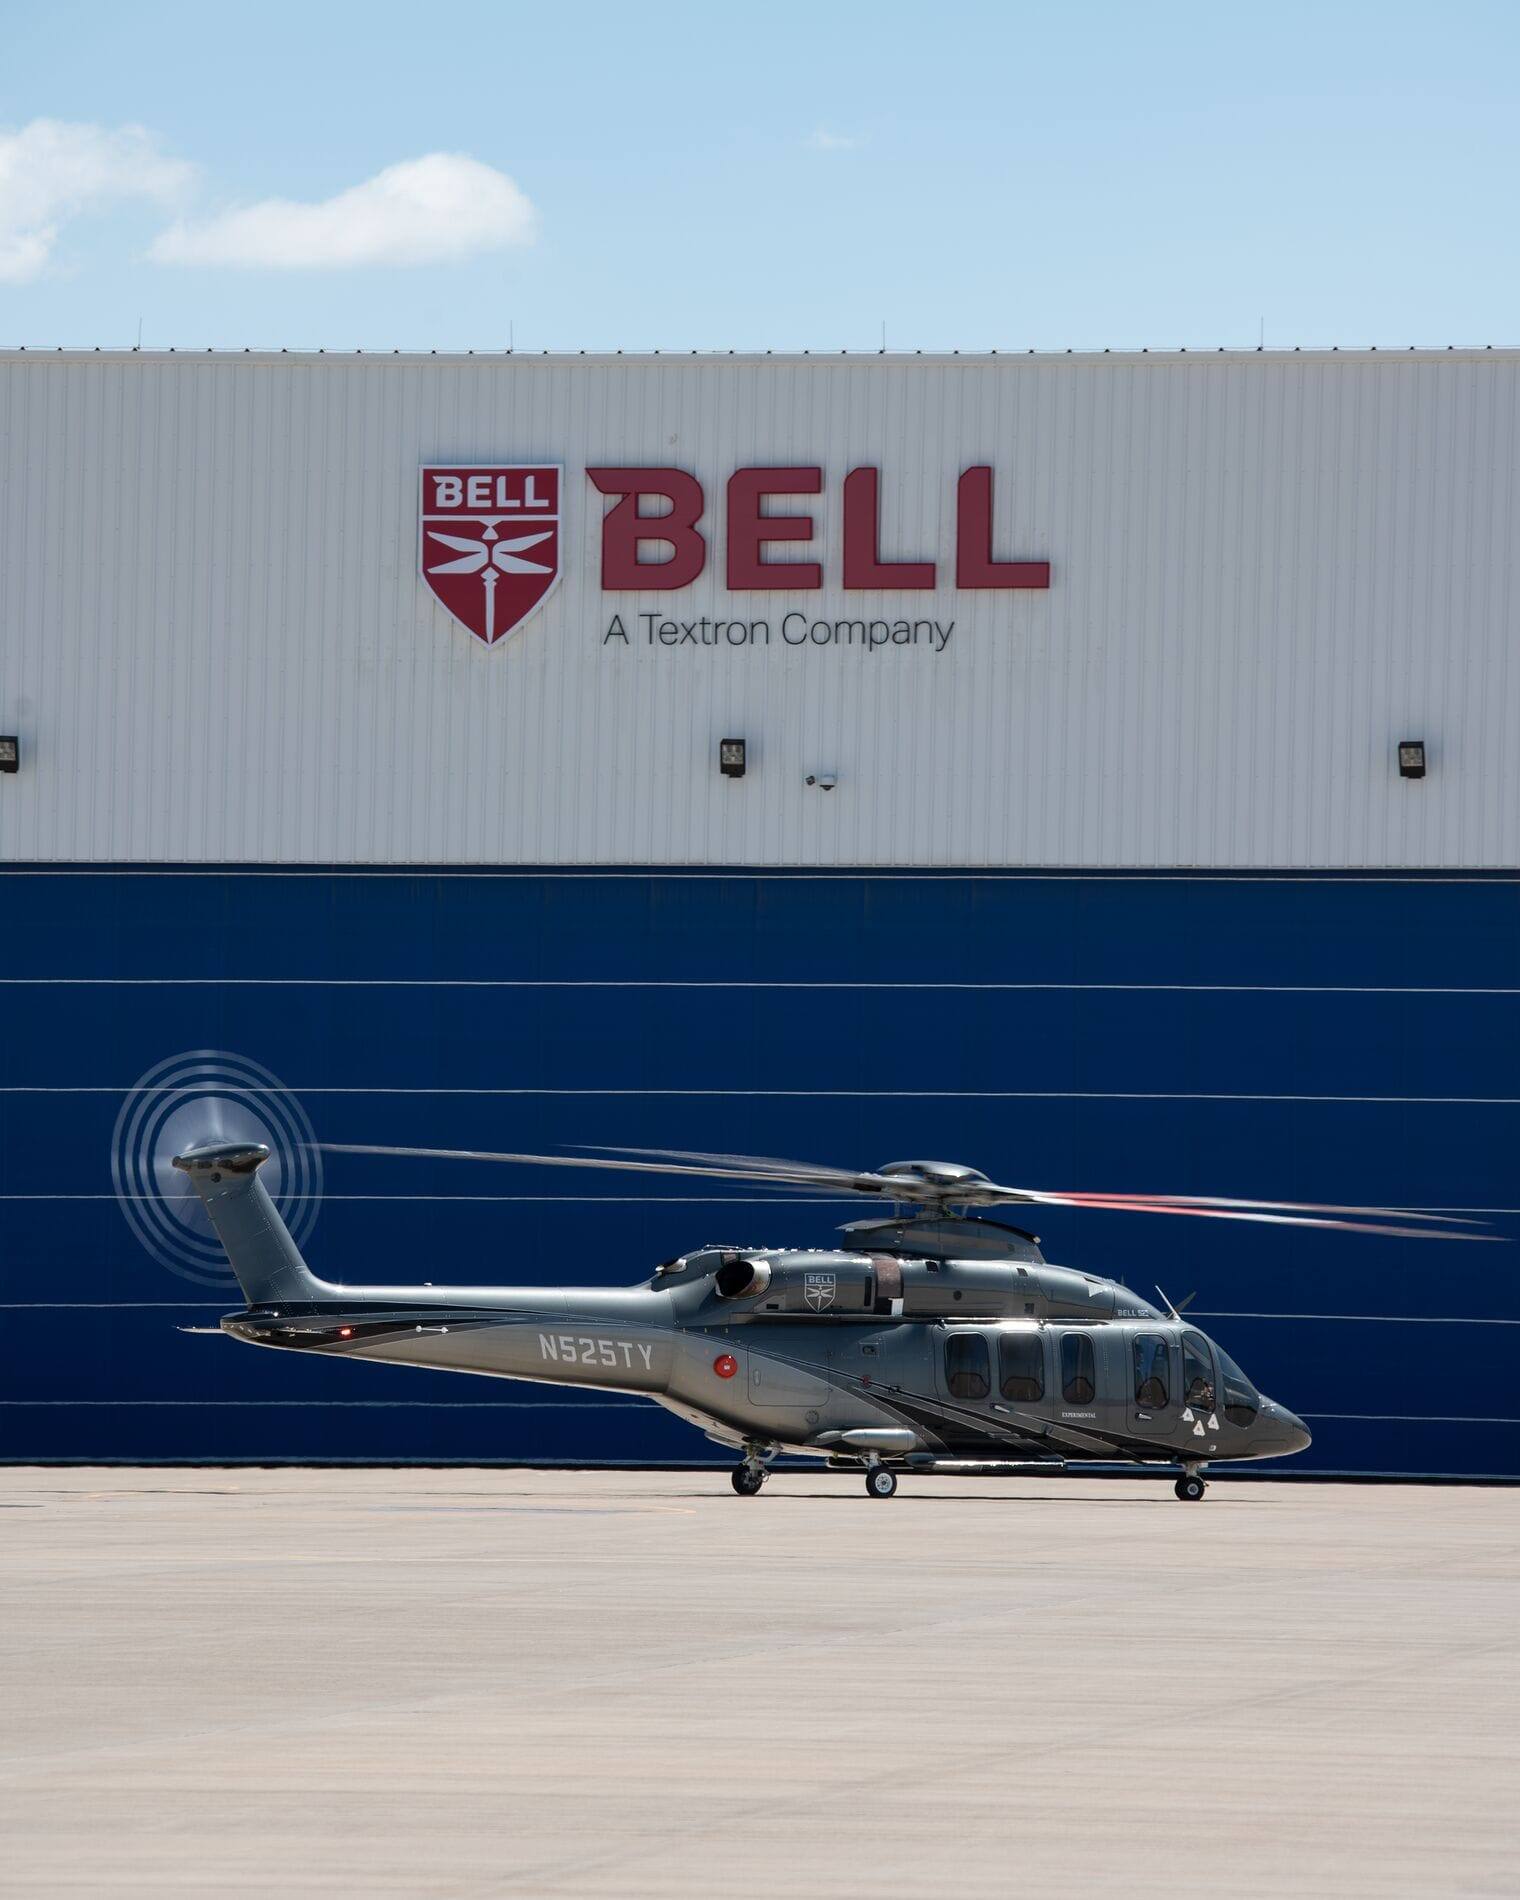 Bell 525 landed at Bell